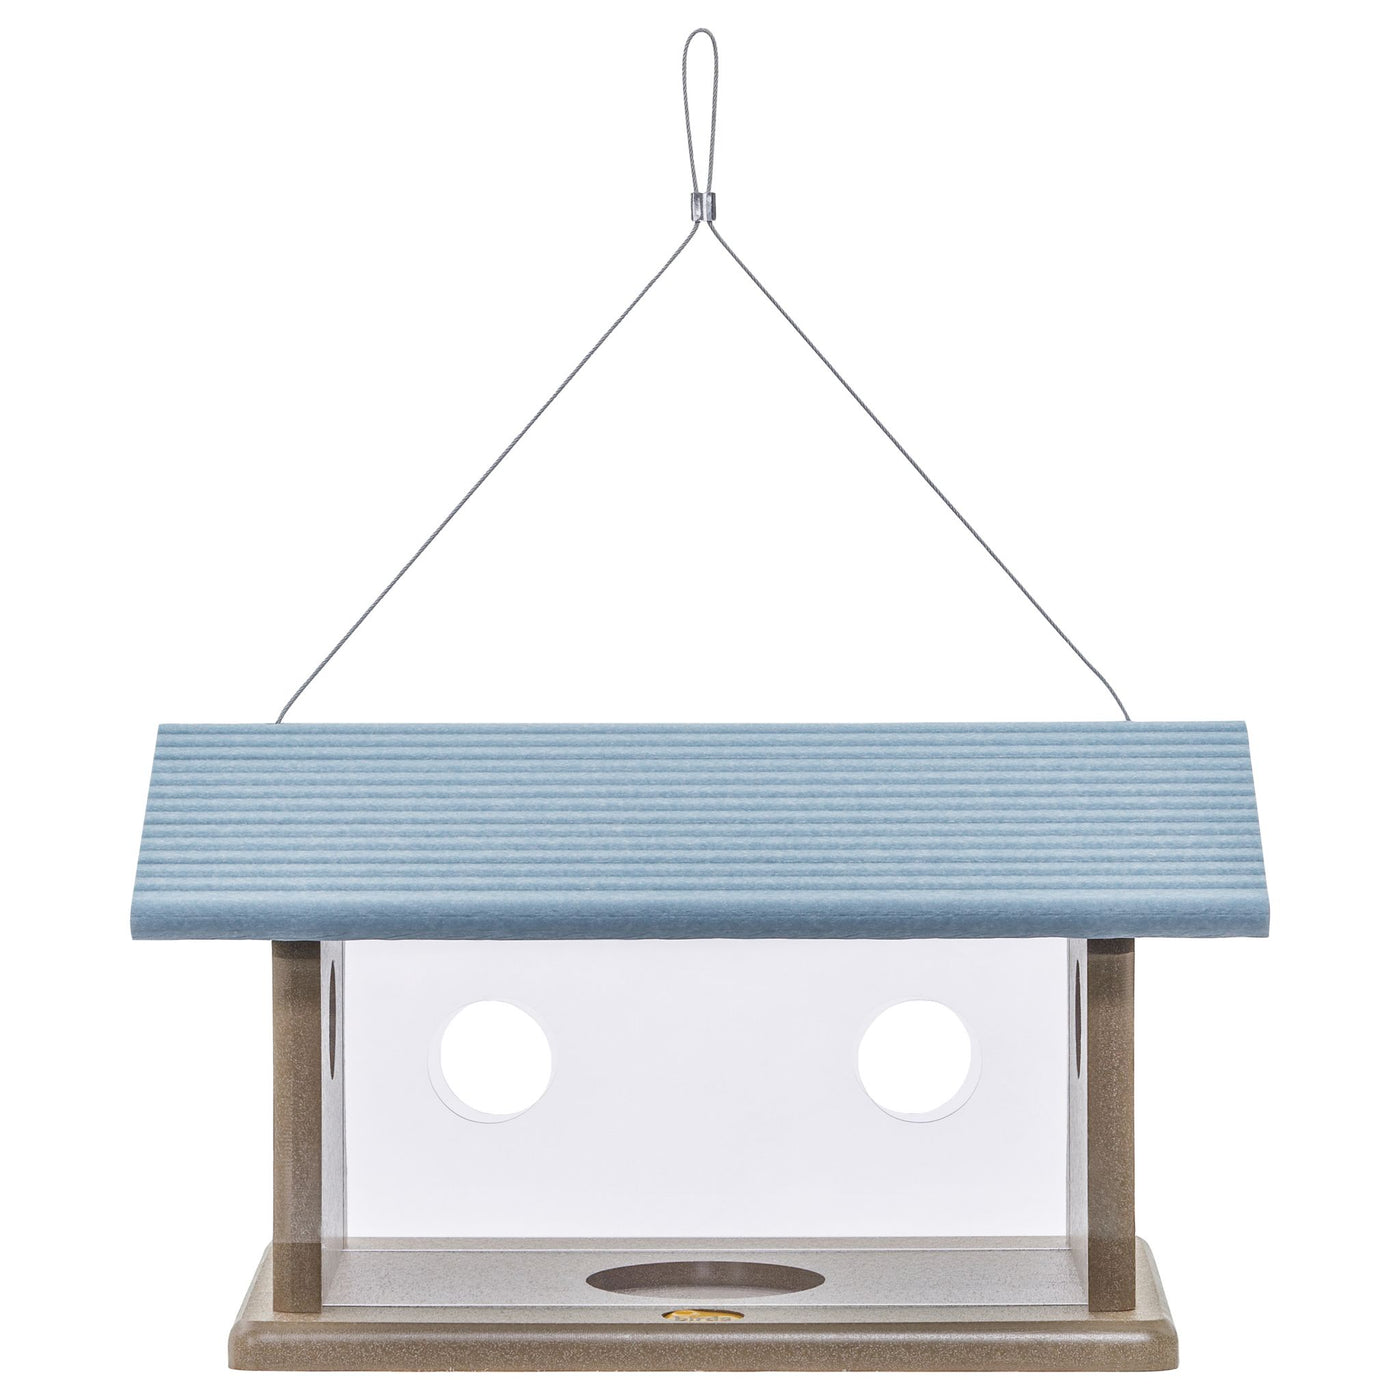 Bluebird Feeder in Taupe and Blue Recycled Plastic - Birds Choice